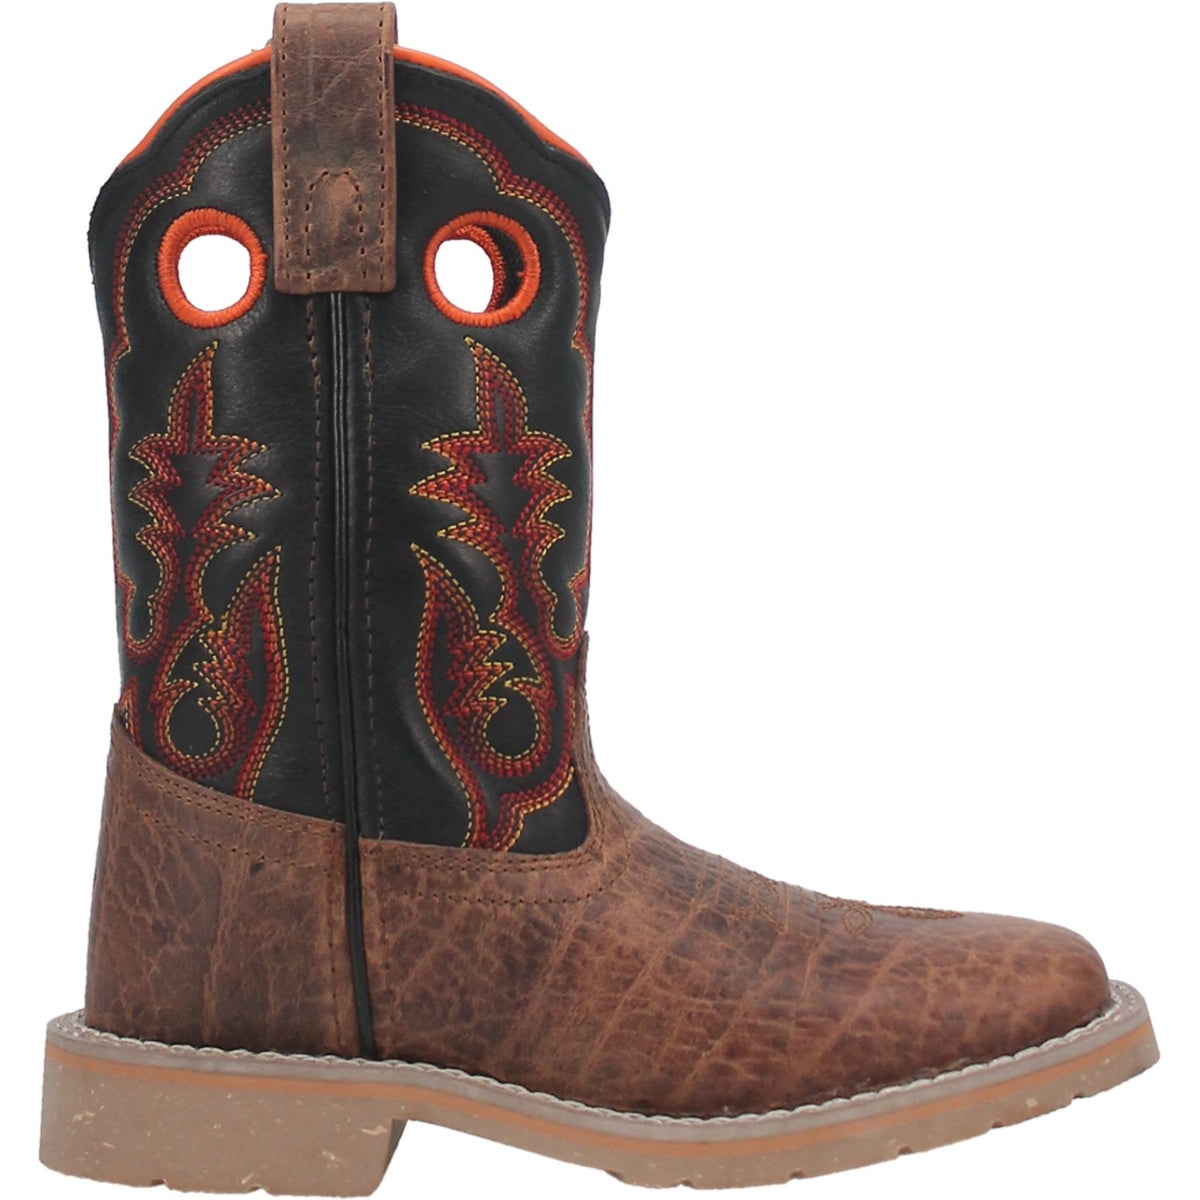 RYE LEATHER YOUTH BOOT Cover